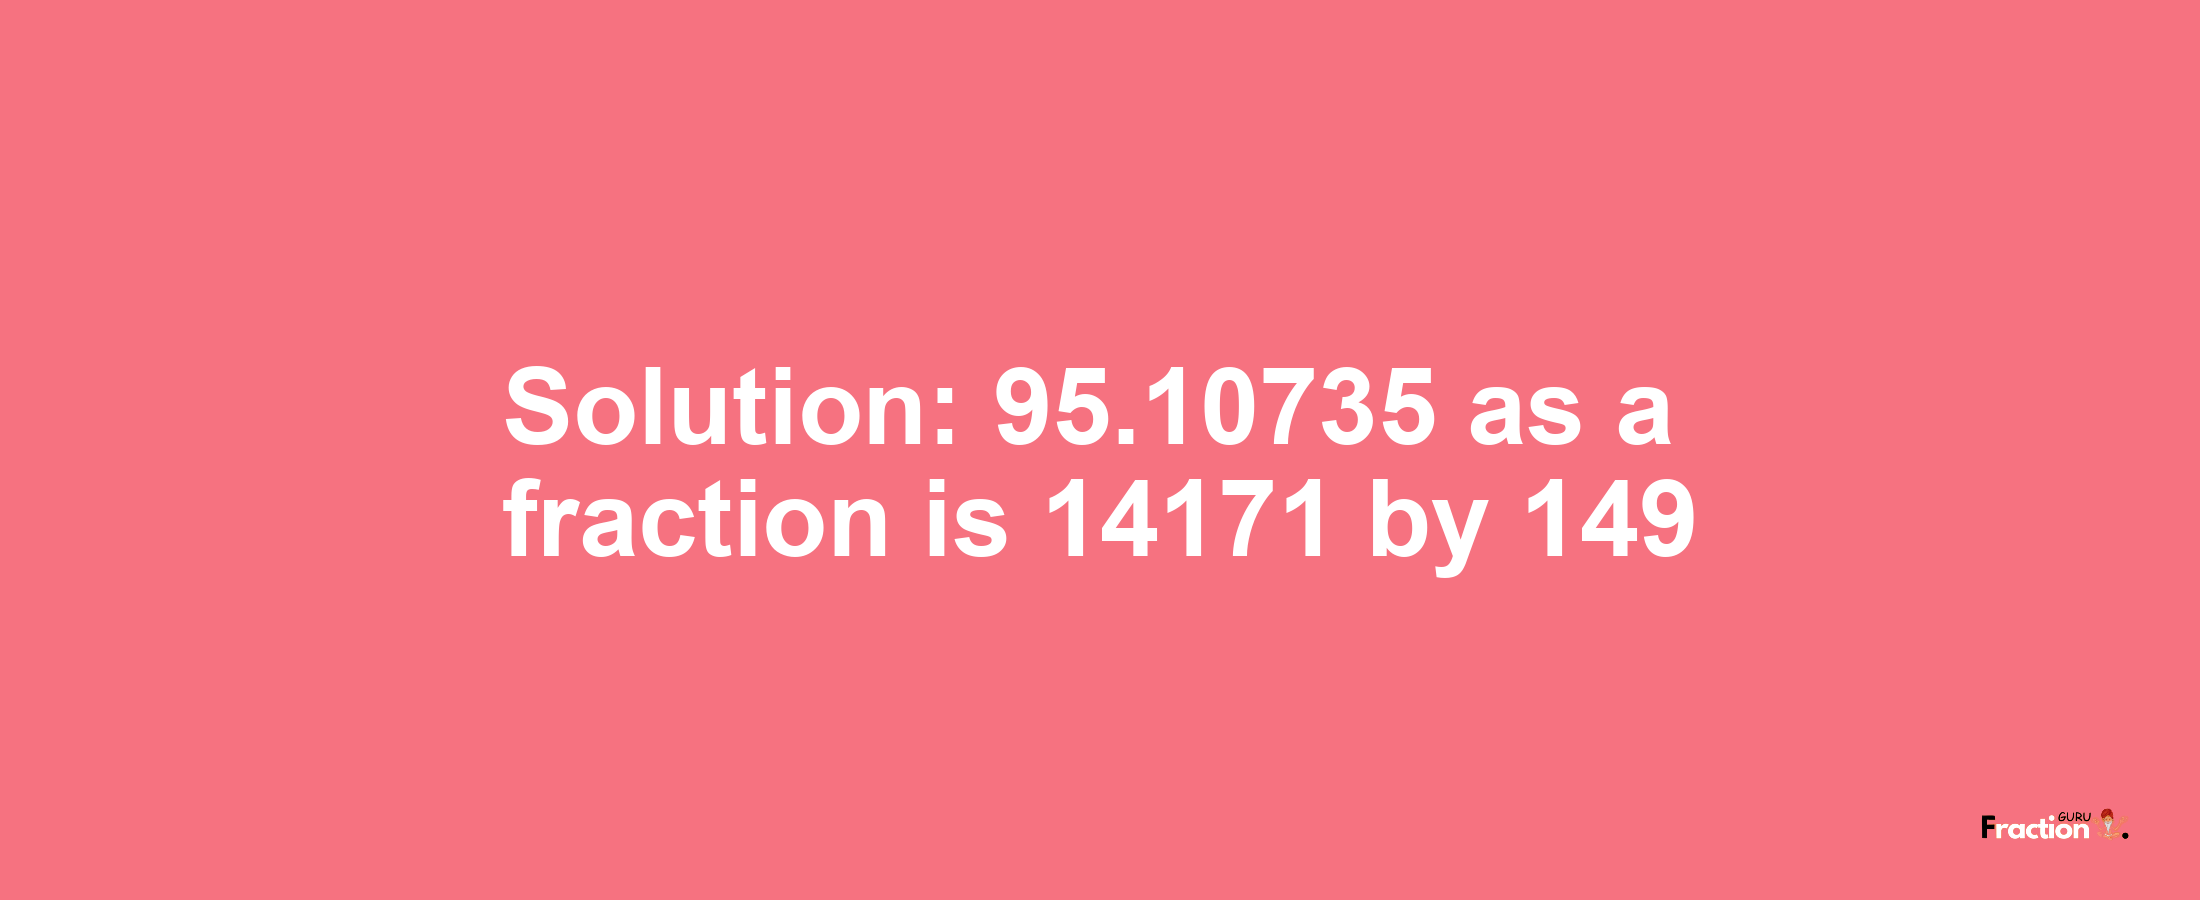 Solution:95.10735 as a fraction is 14171/149